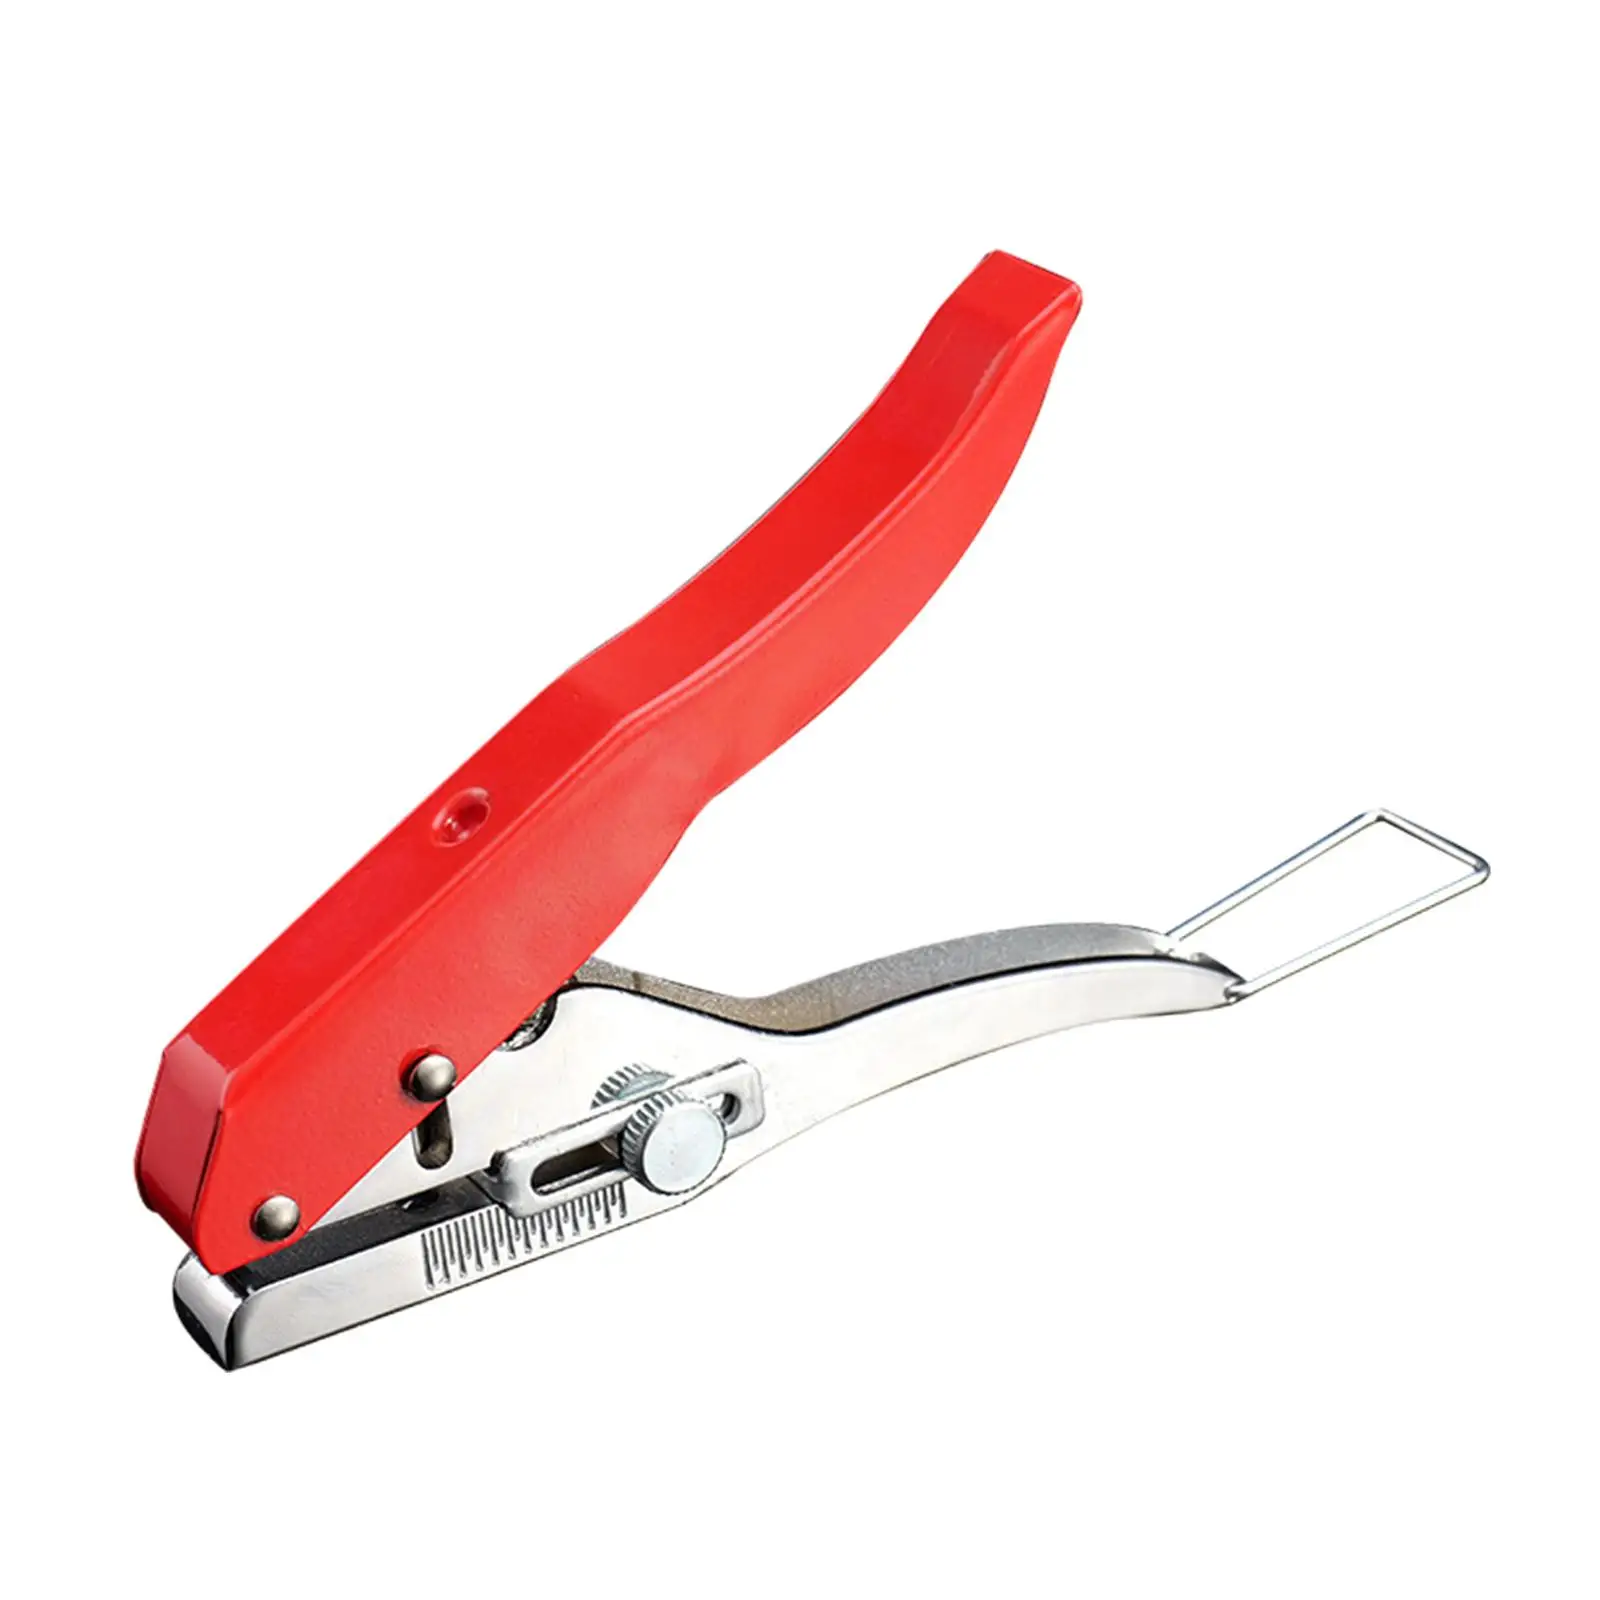 Hole Punch Labor Saving Metal Round Punch Pliers Paper Punch Paper Hole Puncher for PVC Card Label Cardboard Hard Film DIY Craft